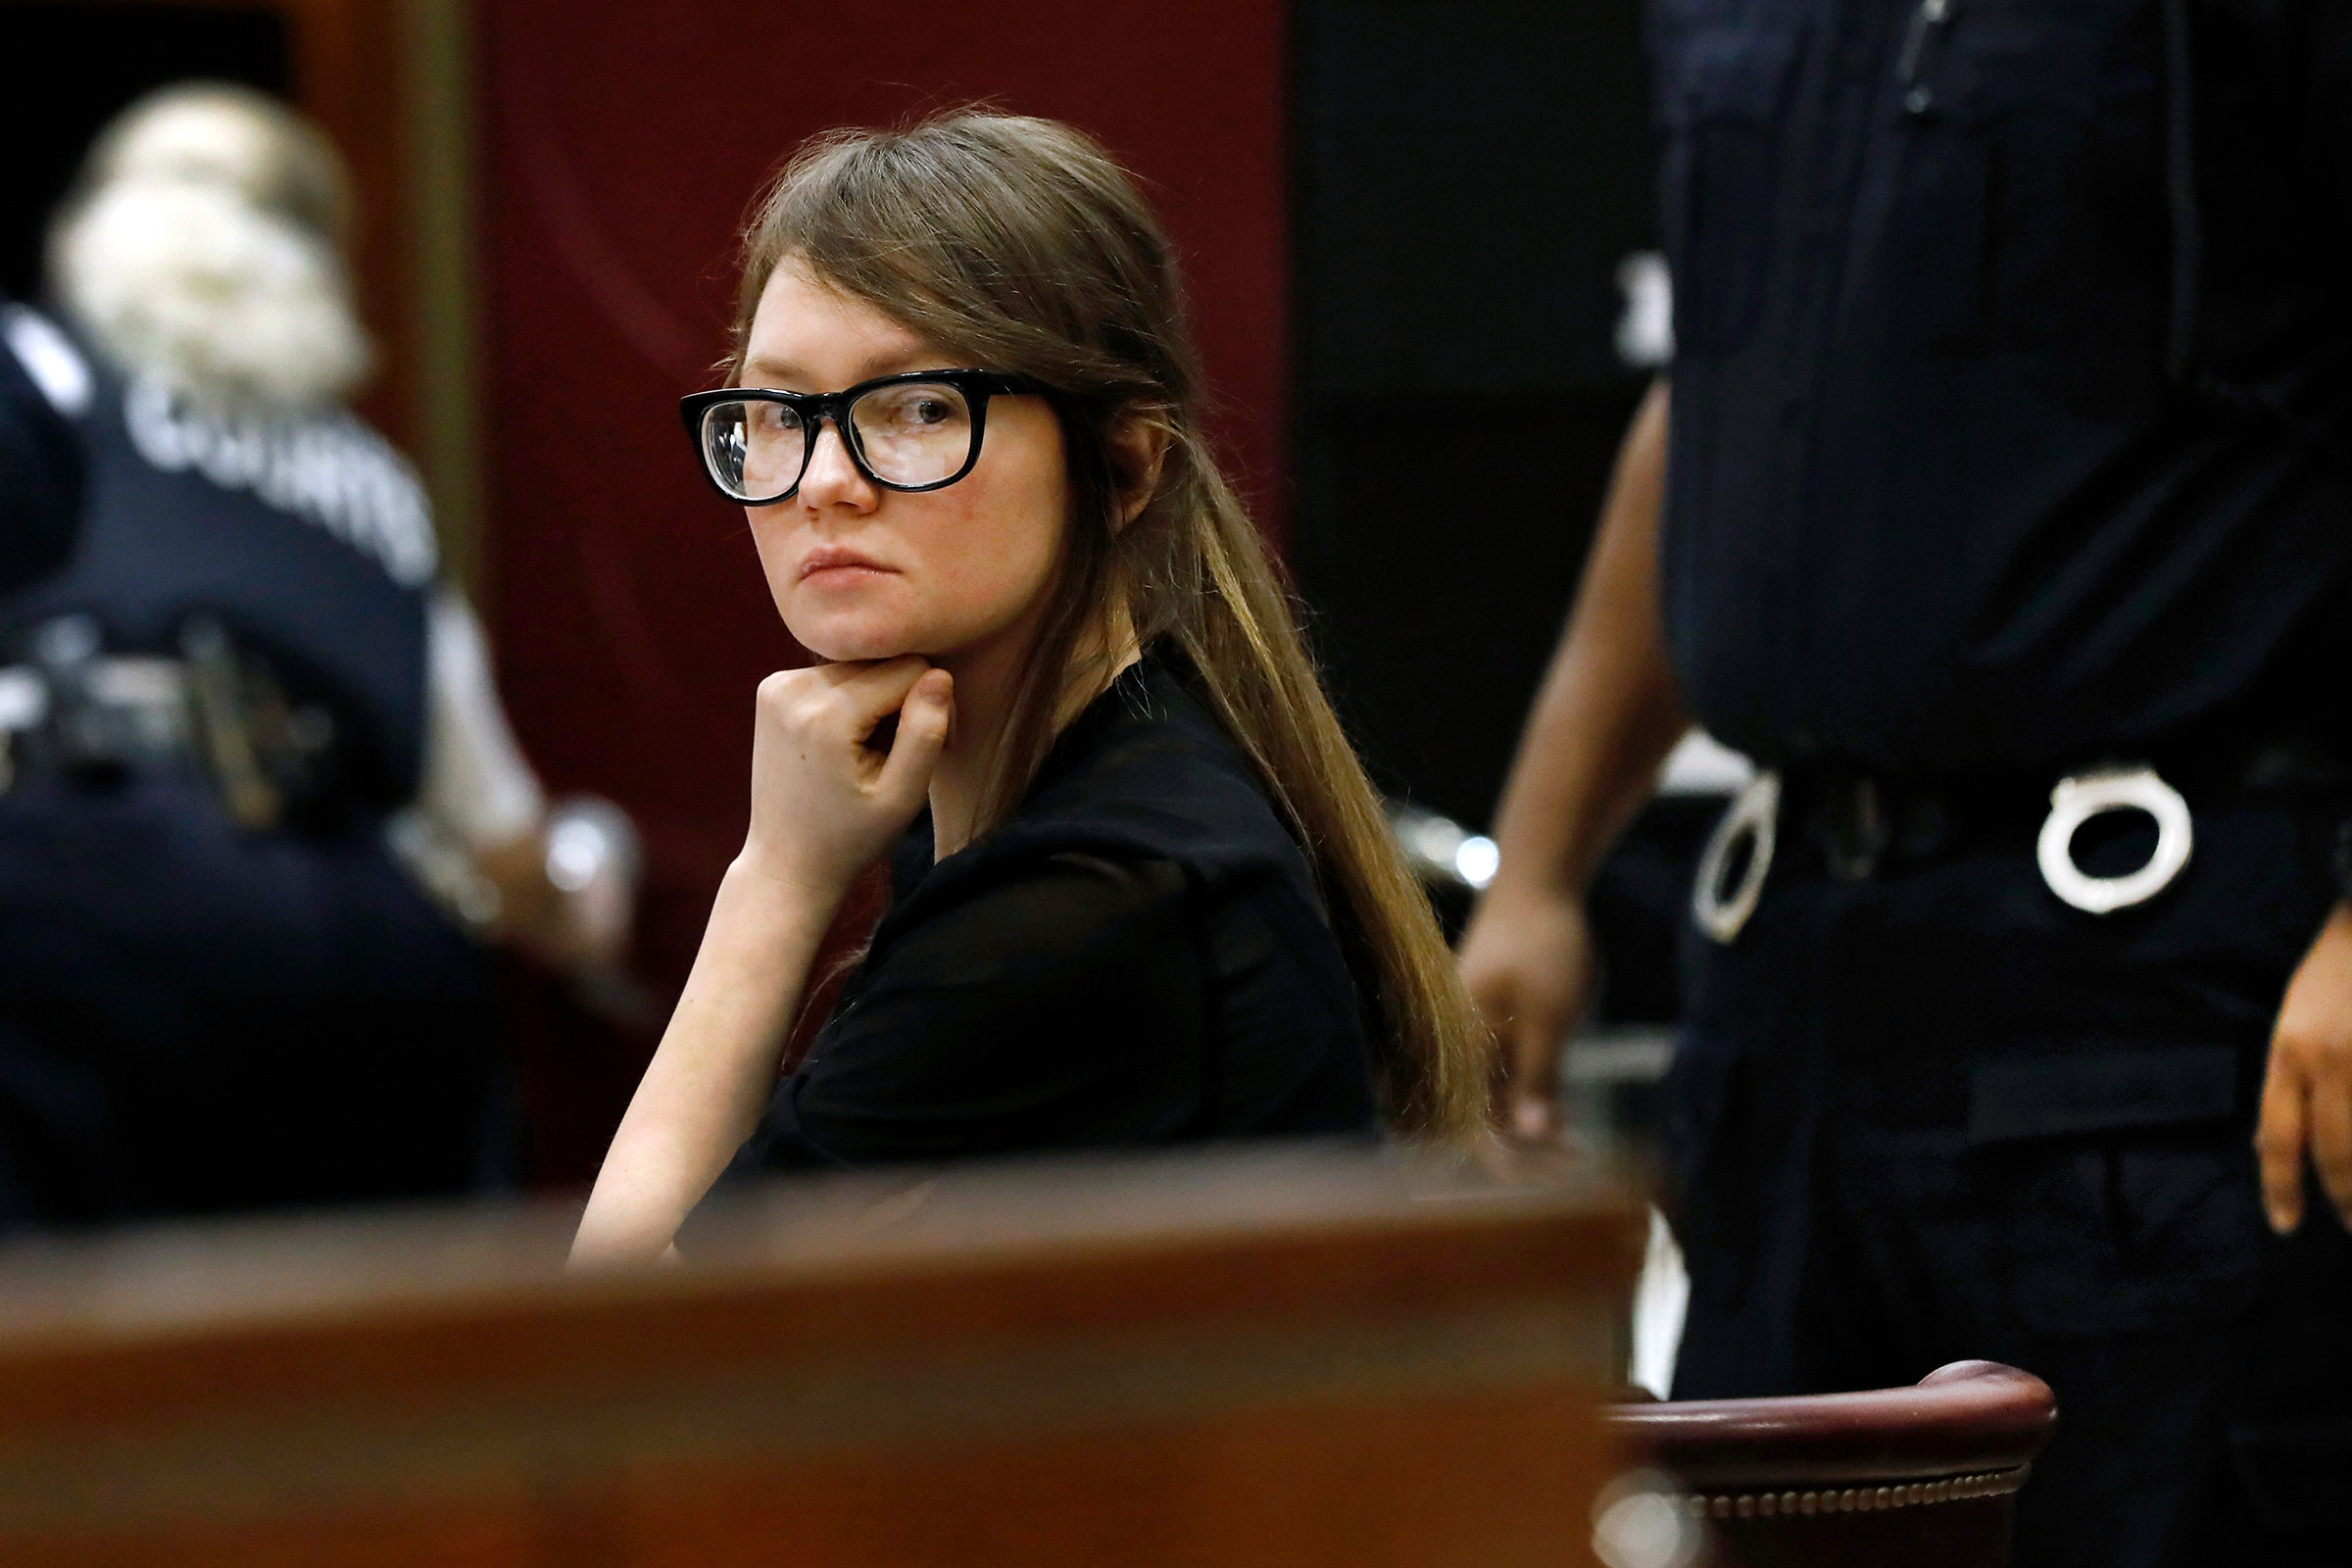 Anna Sorokin sits at the defense table during jury deliberations in her trial at the New York State Supreme Court, April 25, 2019. (Richard Drew—AP)